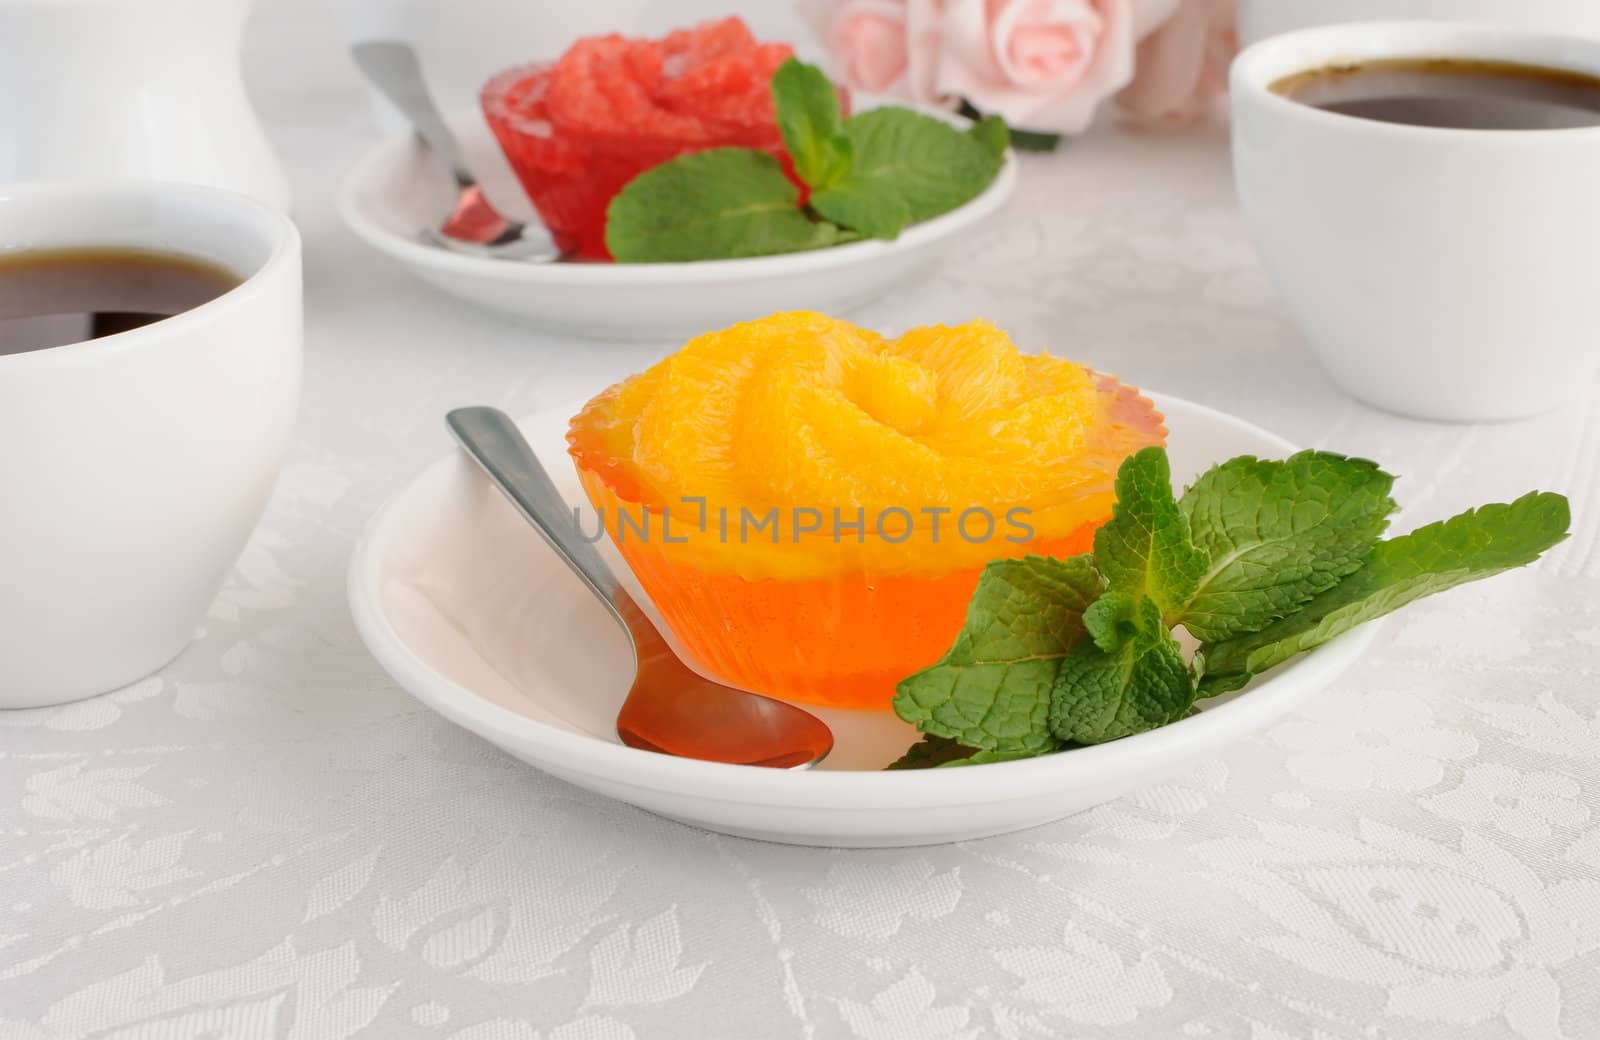 Dessert of orange jelly with fresh orange slices with a cup of coffee